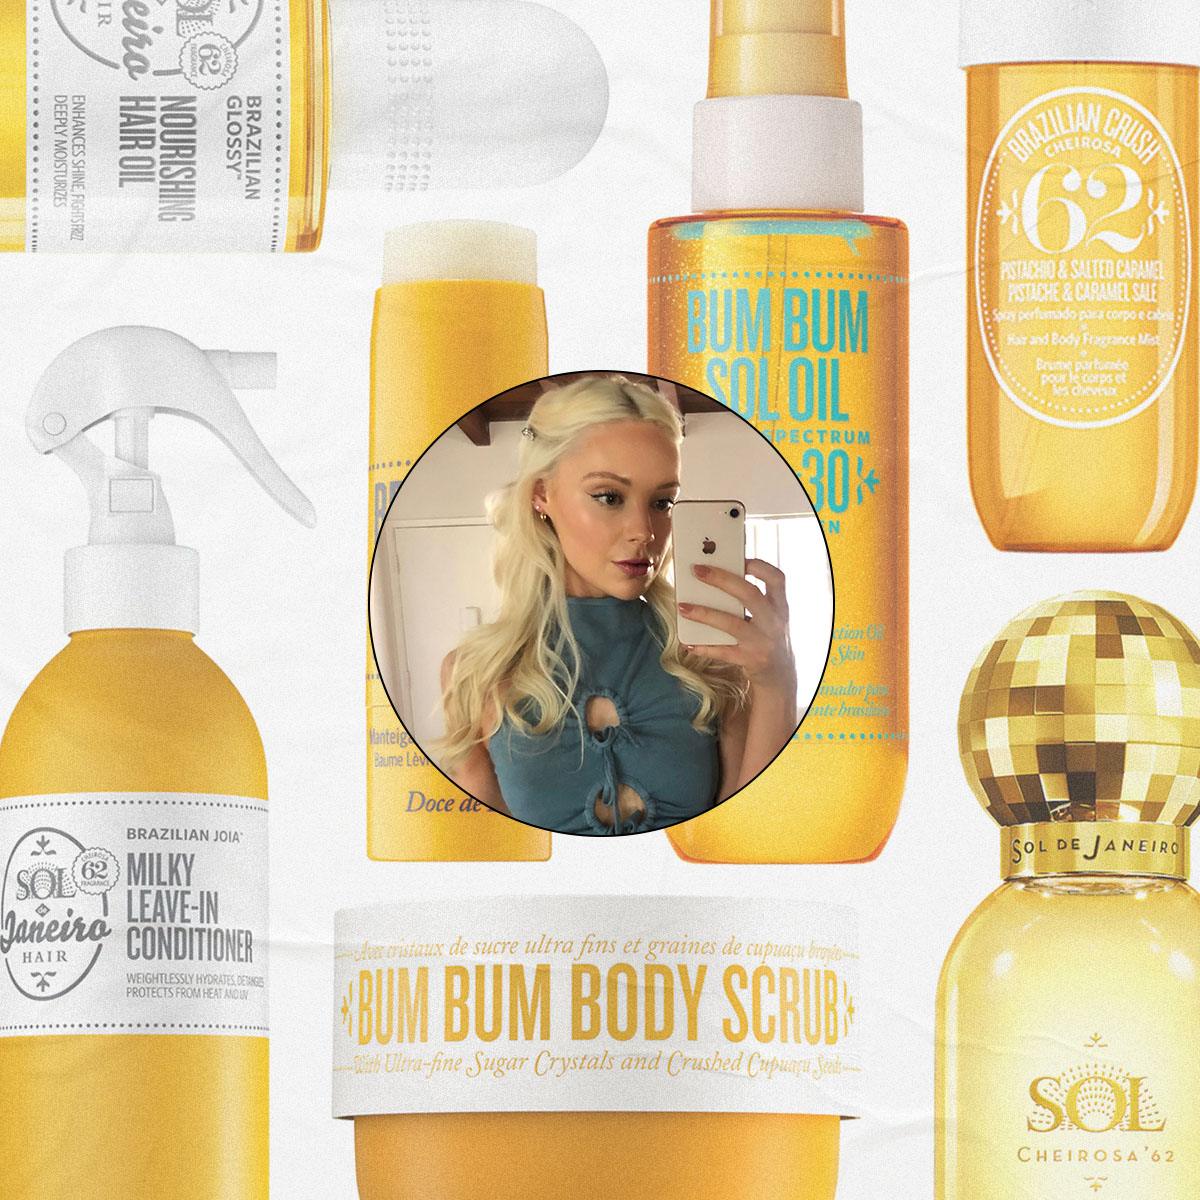 The Best Body Wash and Body Scrub for Smoother, Clearer-Looking Skin – Sol  de Janeiro